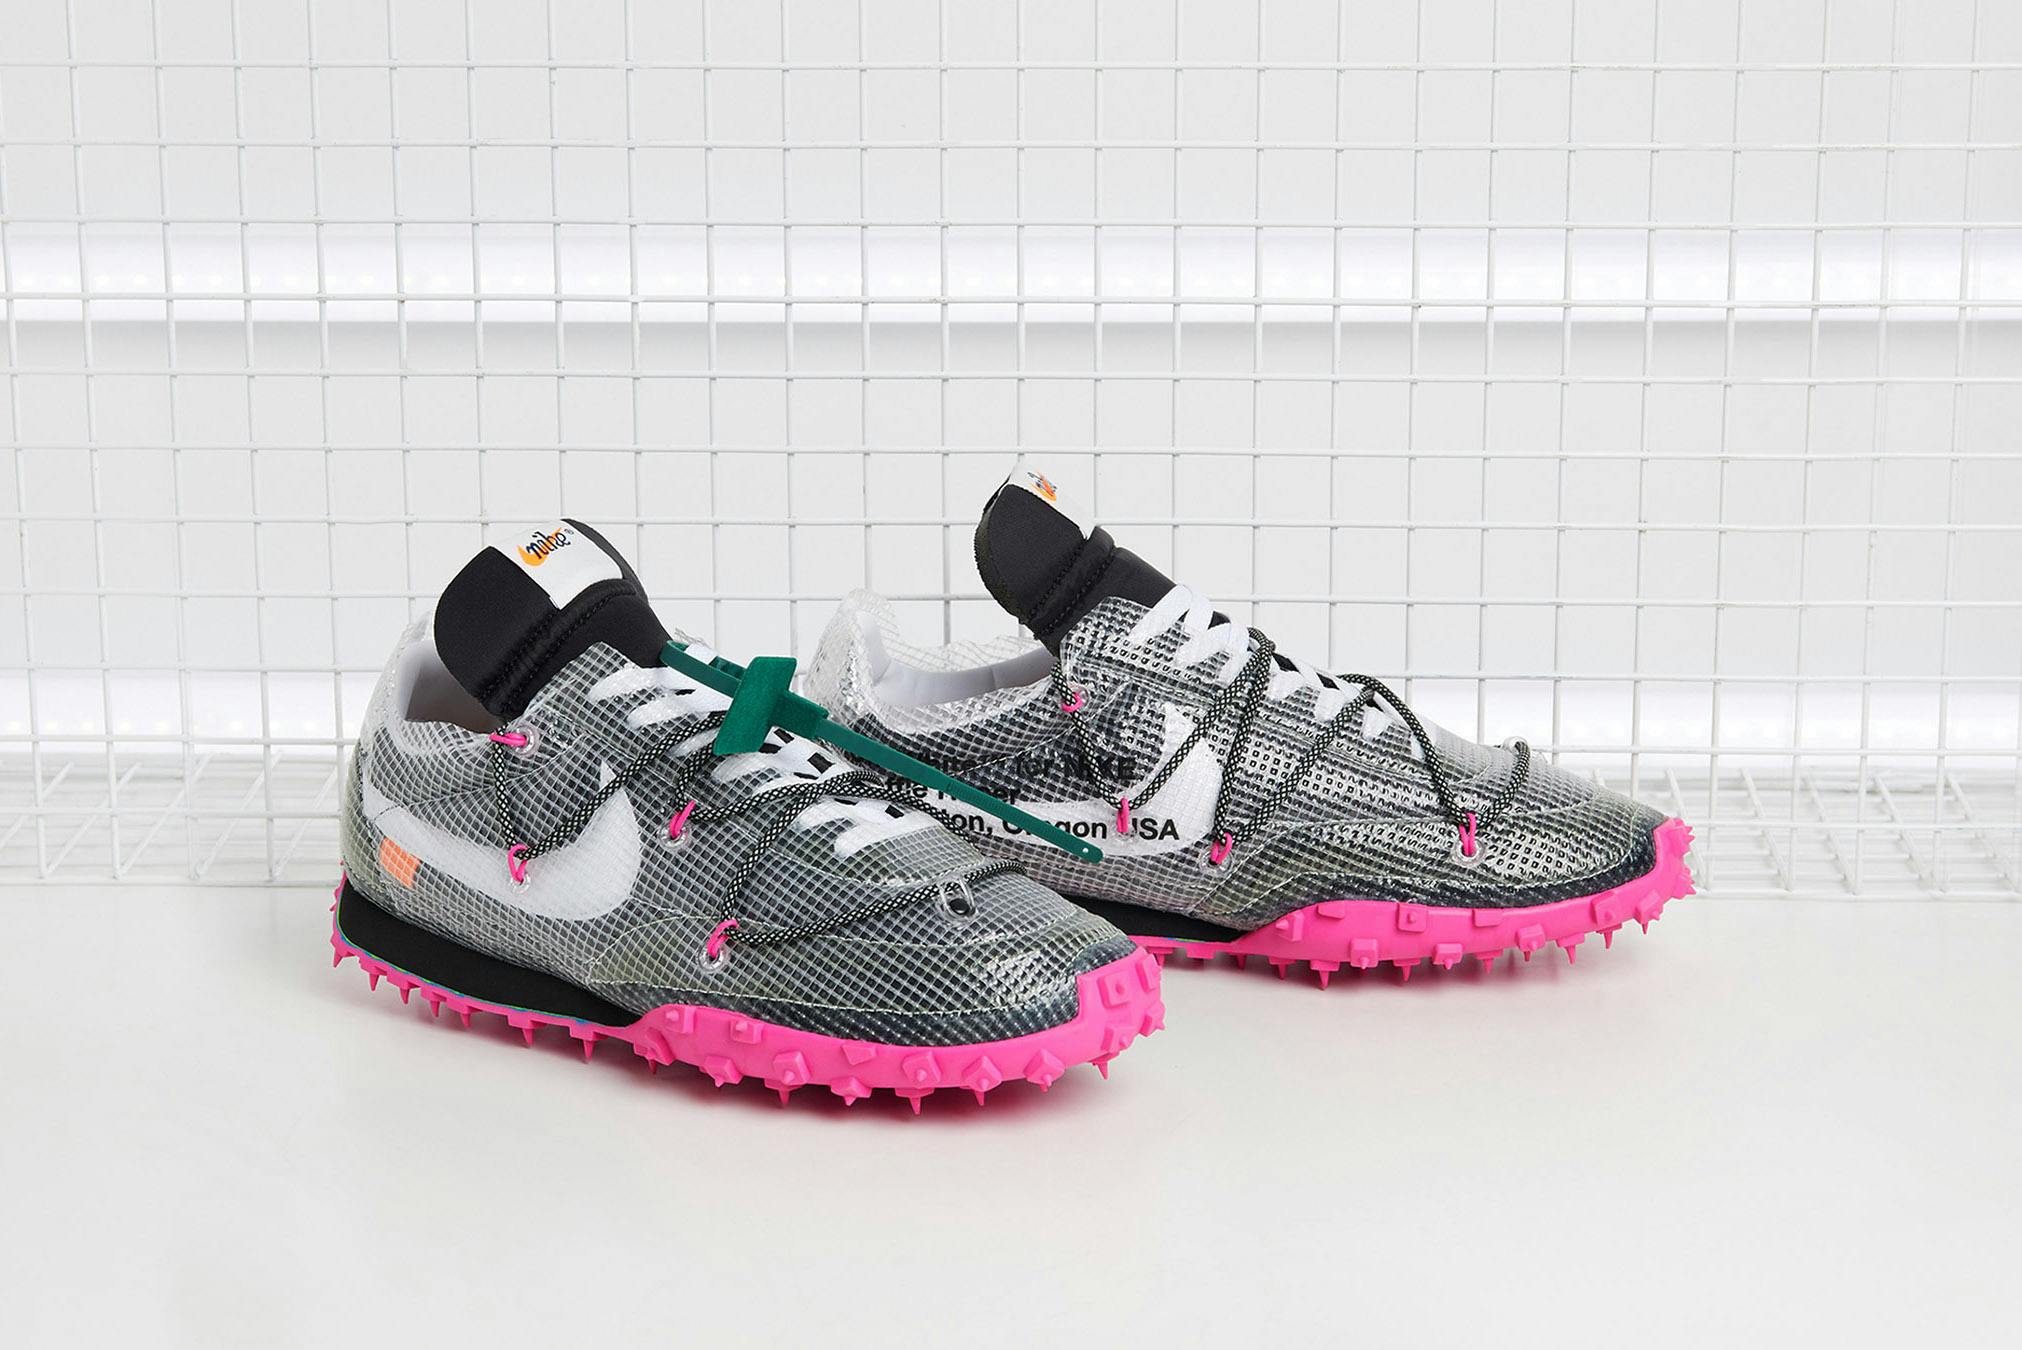 Nike x Off-White Waffle Racer - Register Now on END. Launches | END.